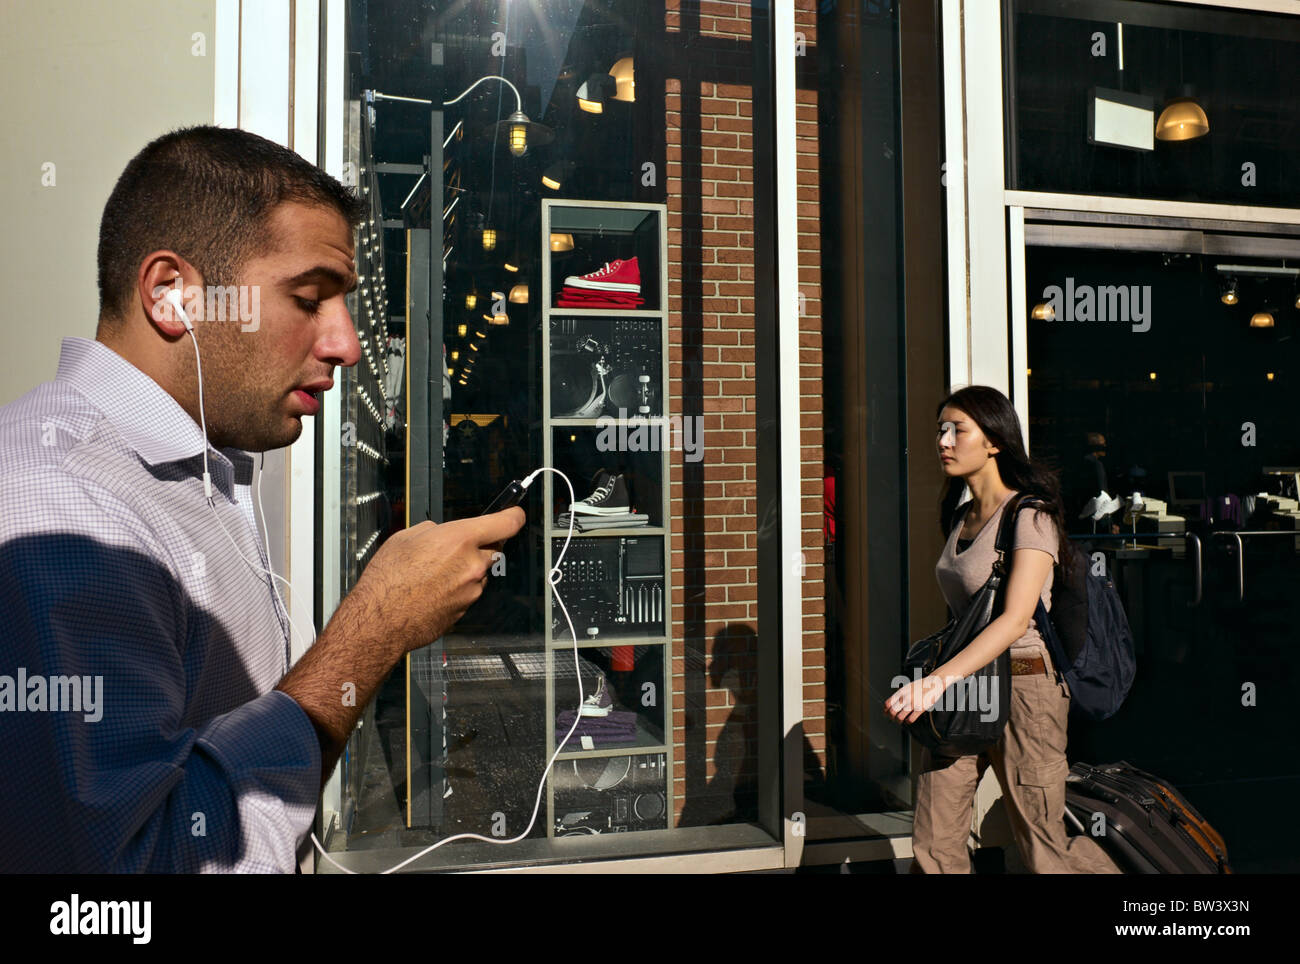 Man walking while operating hand-held device and wearing ear phones. Stock Photo